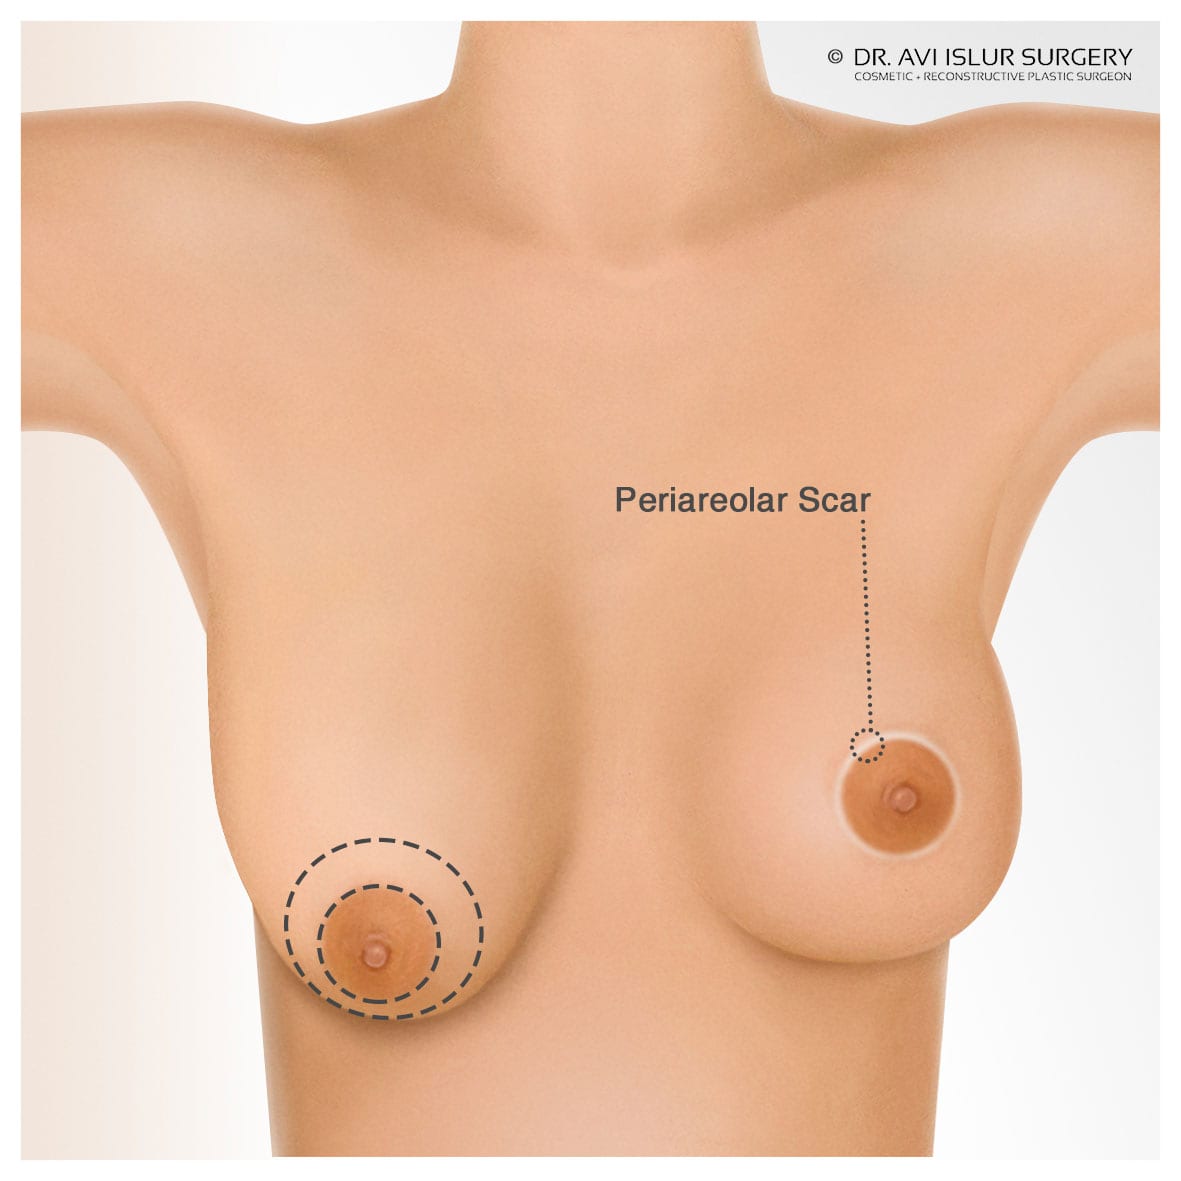 Illustration of a Periareolar Scar for Breast Lift Surgery Dr. Avi Islur Winnipeg, Manitoba, Canada The First Glance